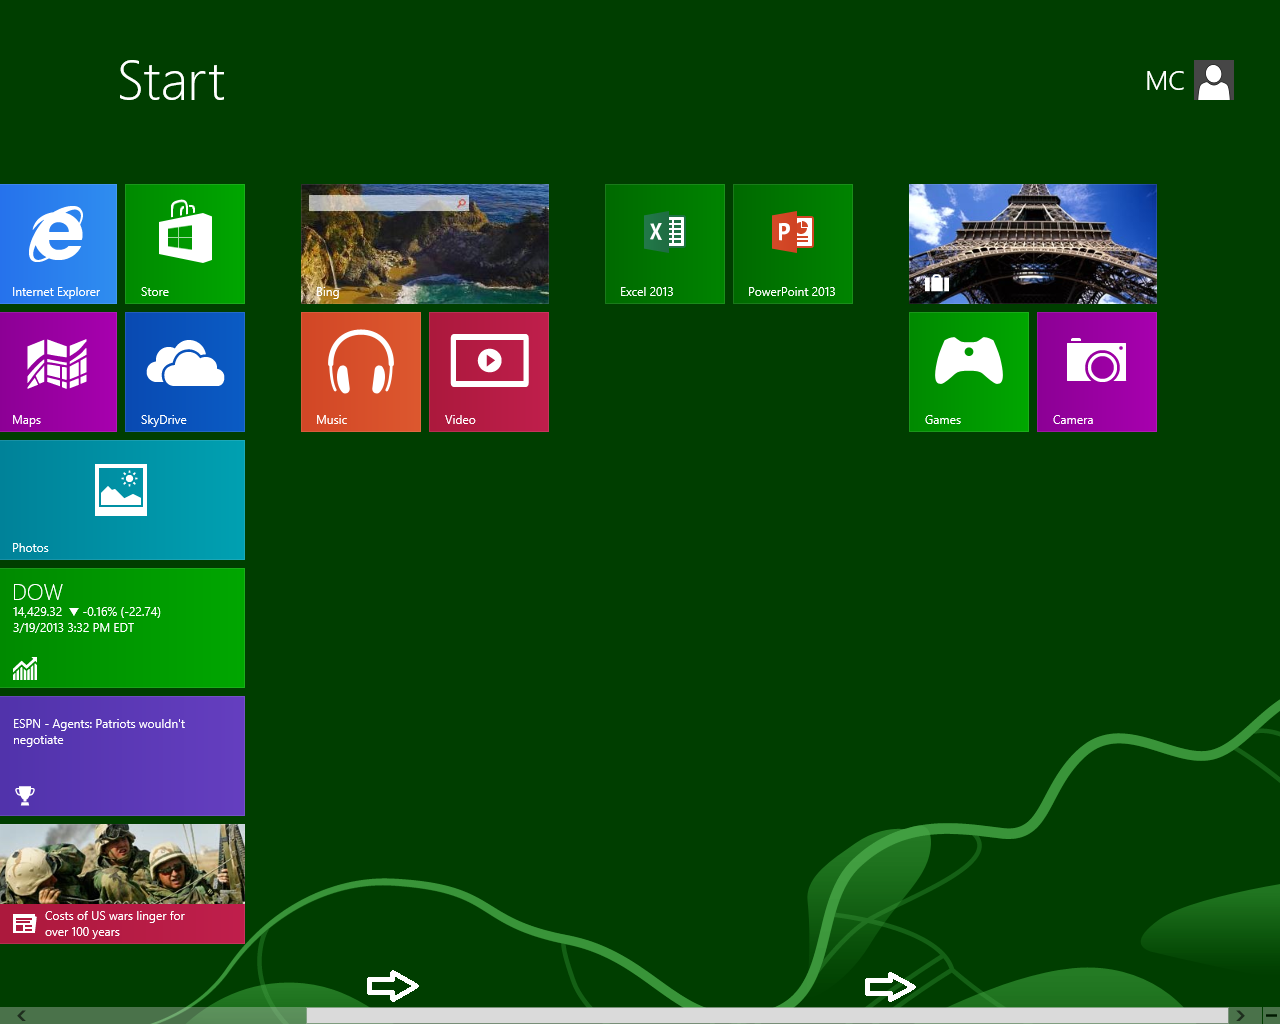 Windows 8 Start Screen-Scrolled to Right